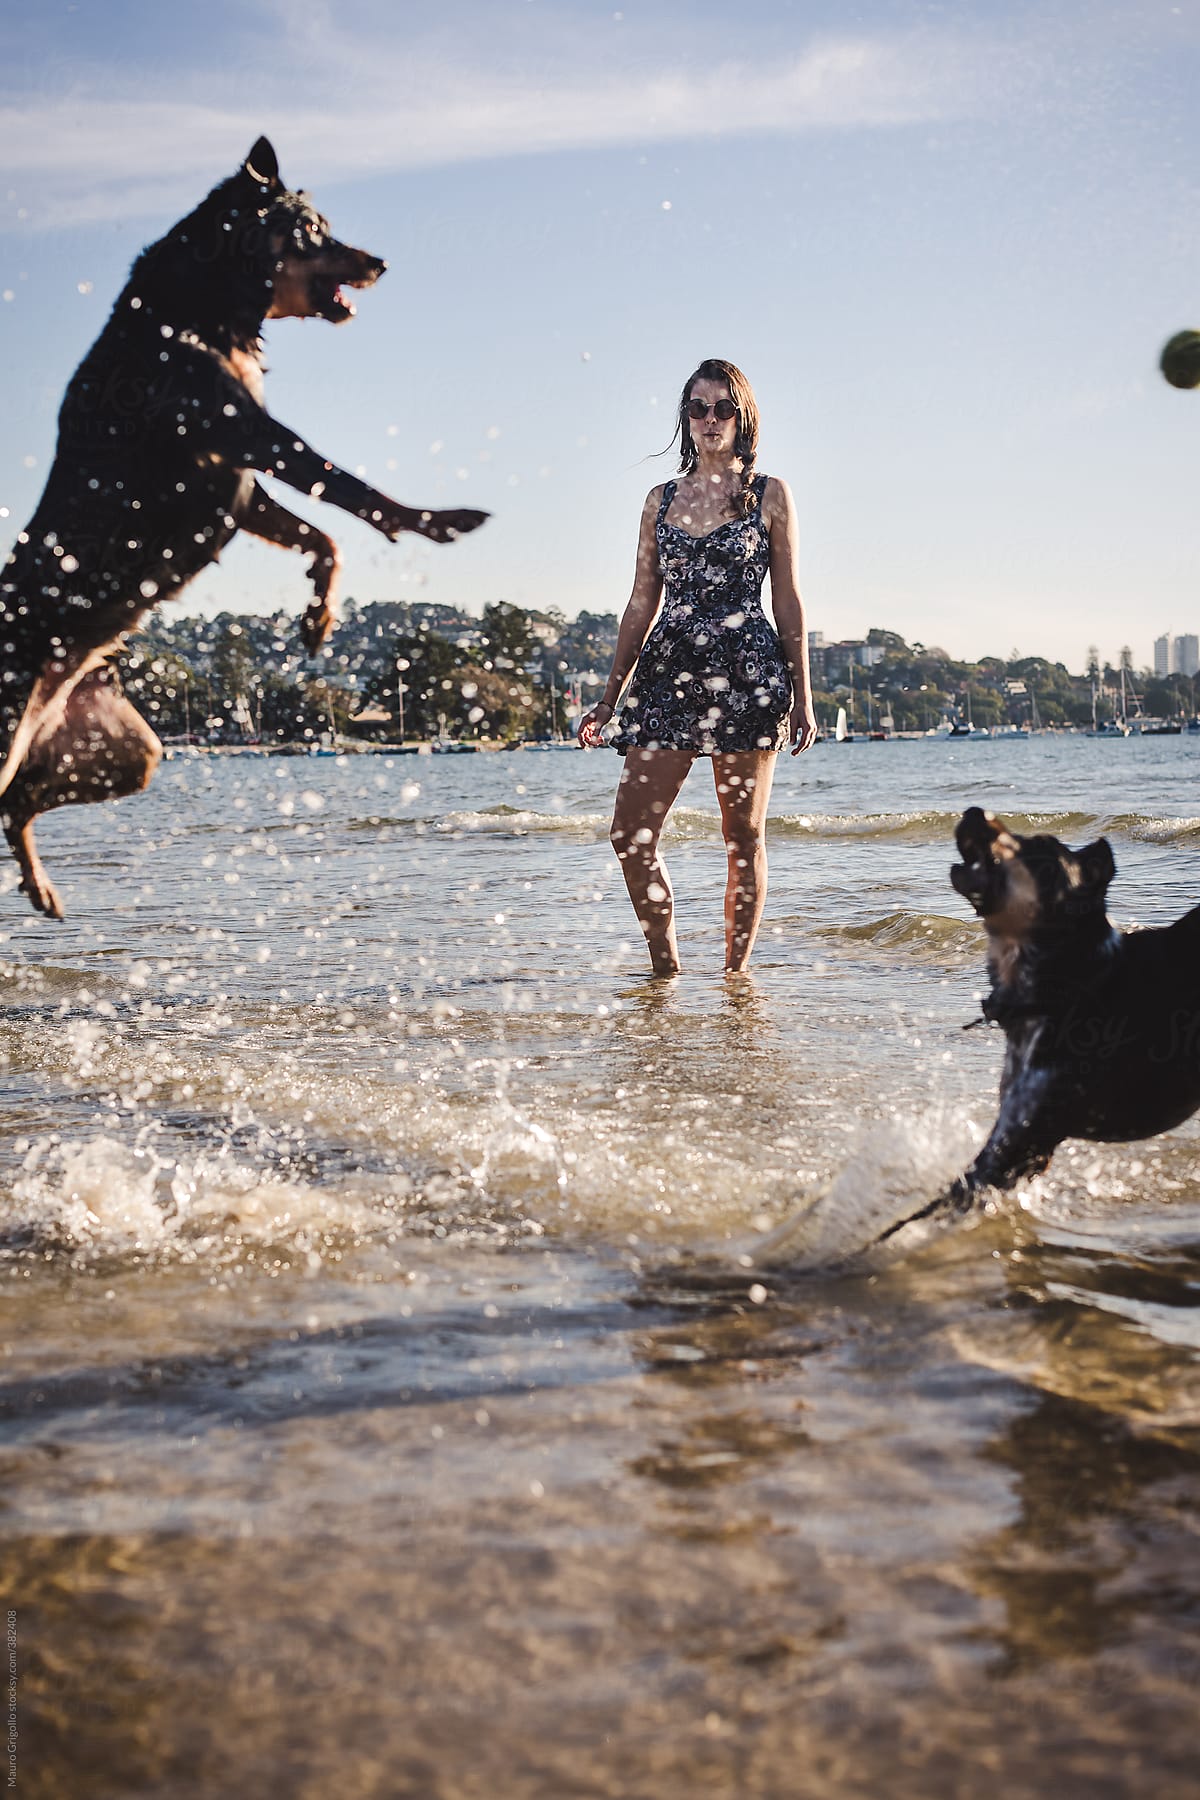 Dogs jump to get the ball in the sea